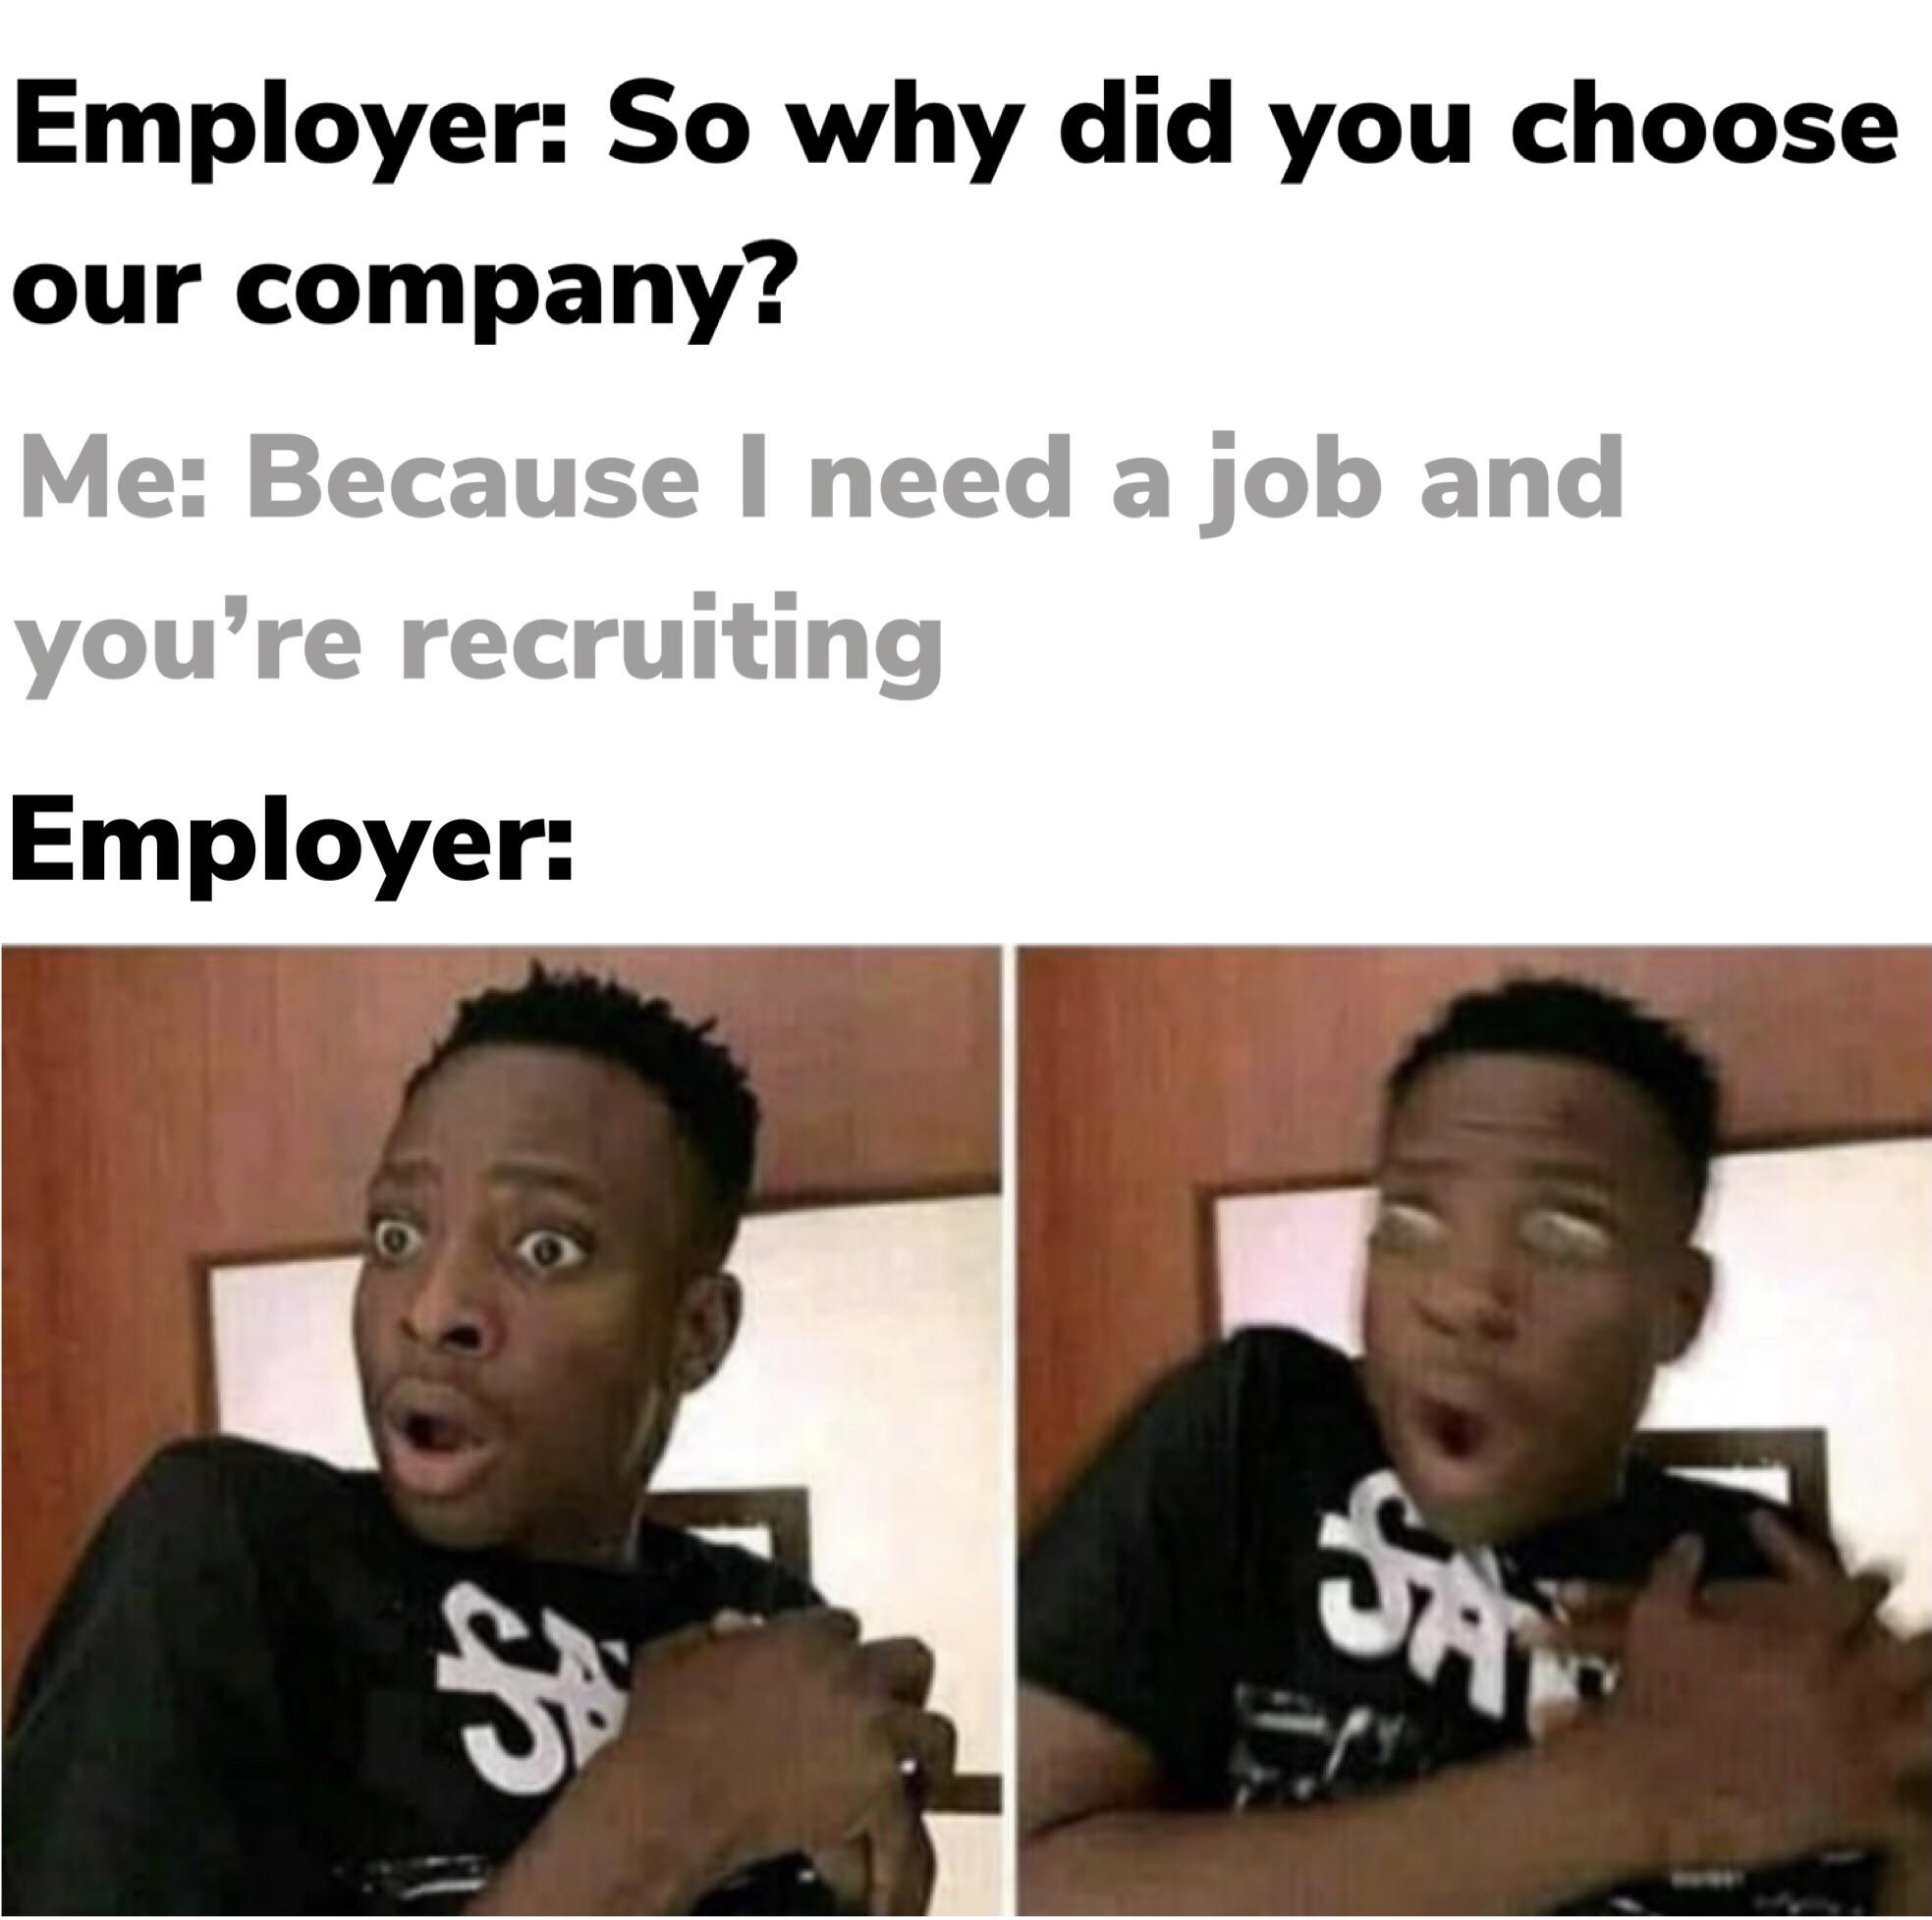 cashier gave too much change - Employer So why did you choose our company? Me Because I need a job and you're recruiting Employer Sam S